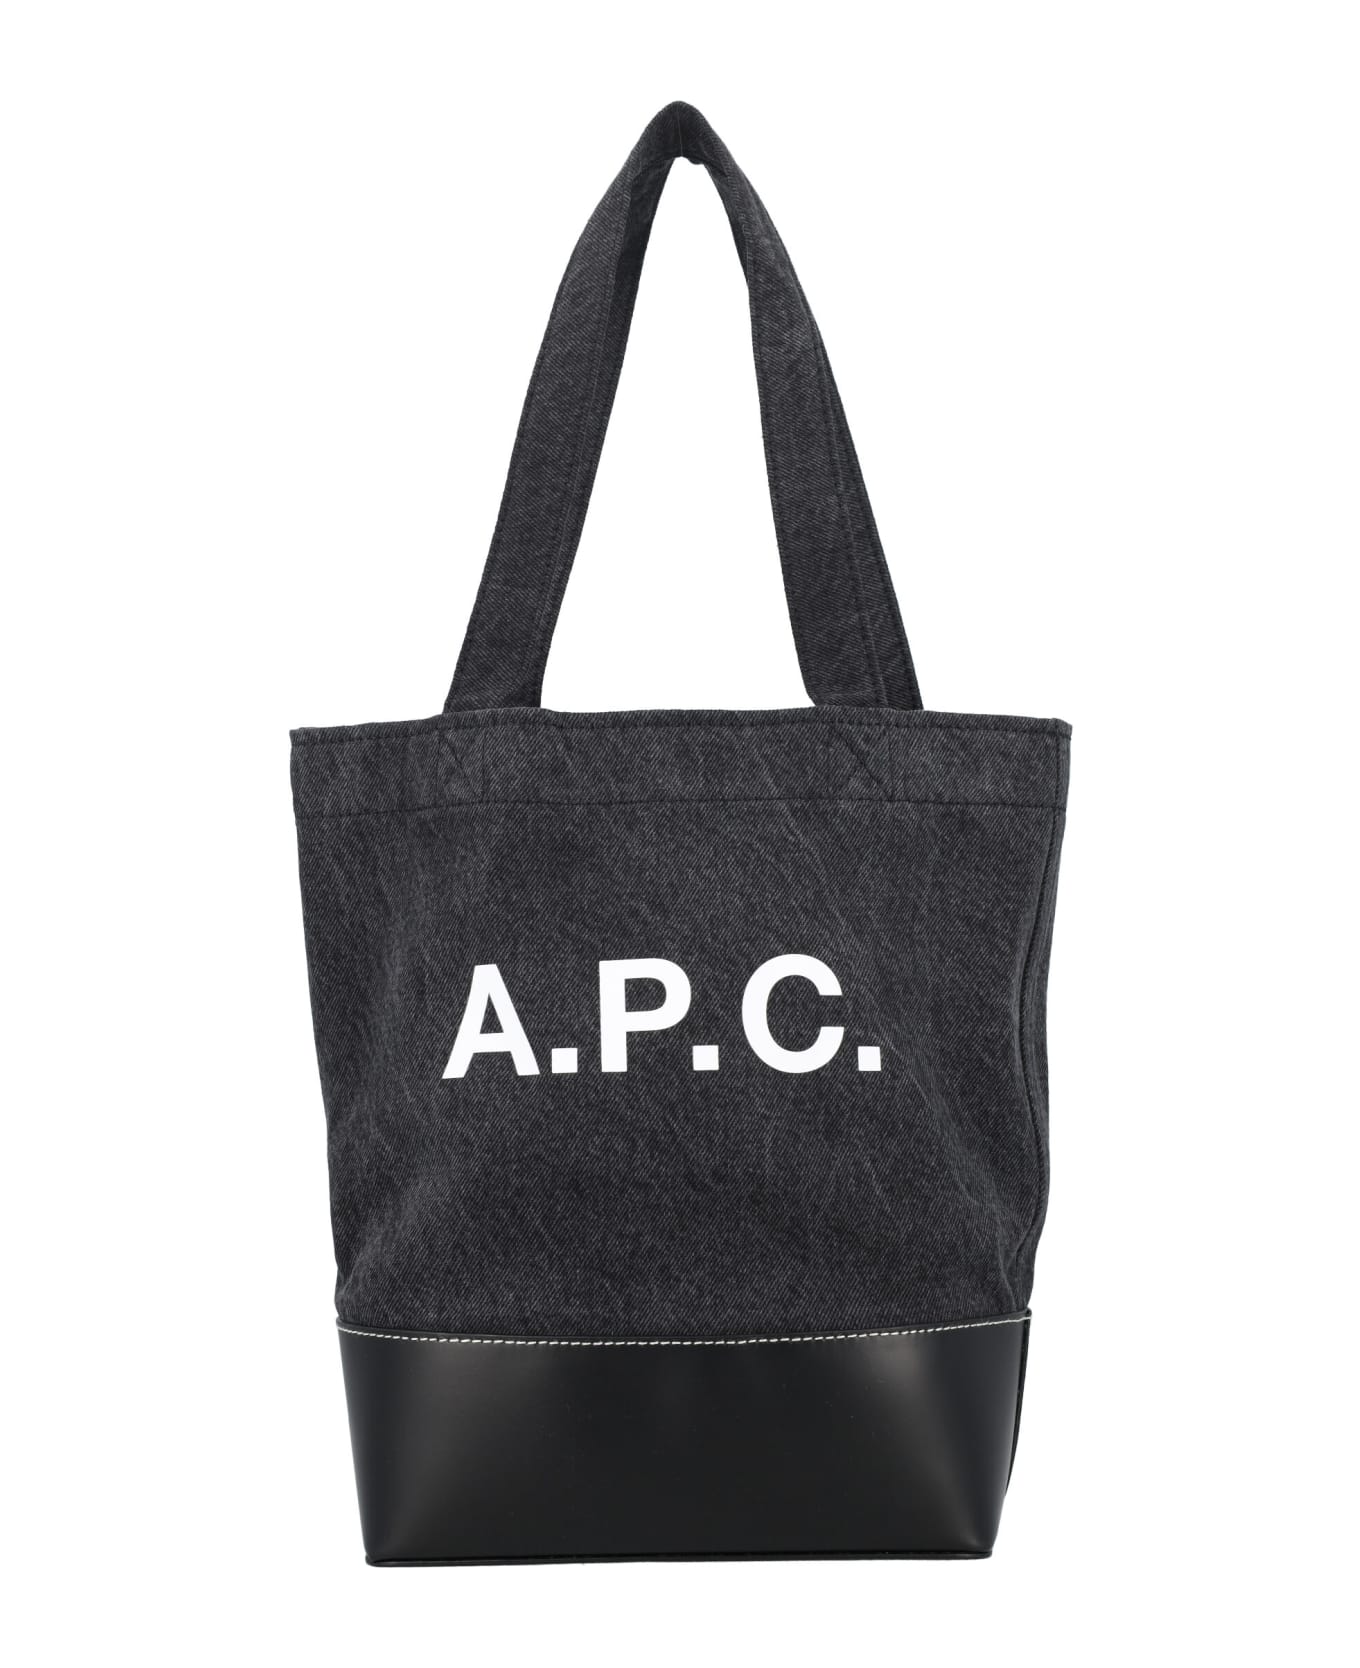 A.P.C. Axel Small Tote Bag - BLACK BLUE トートバッグ